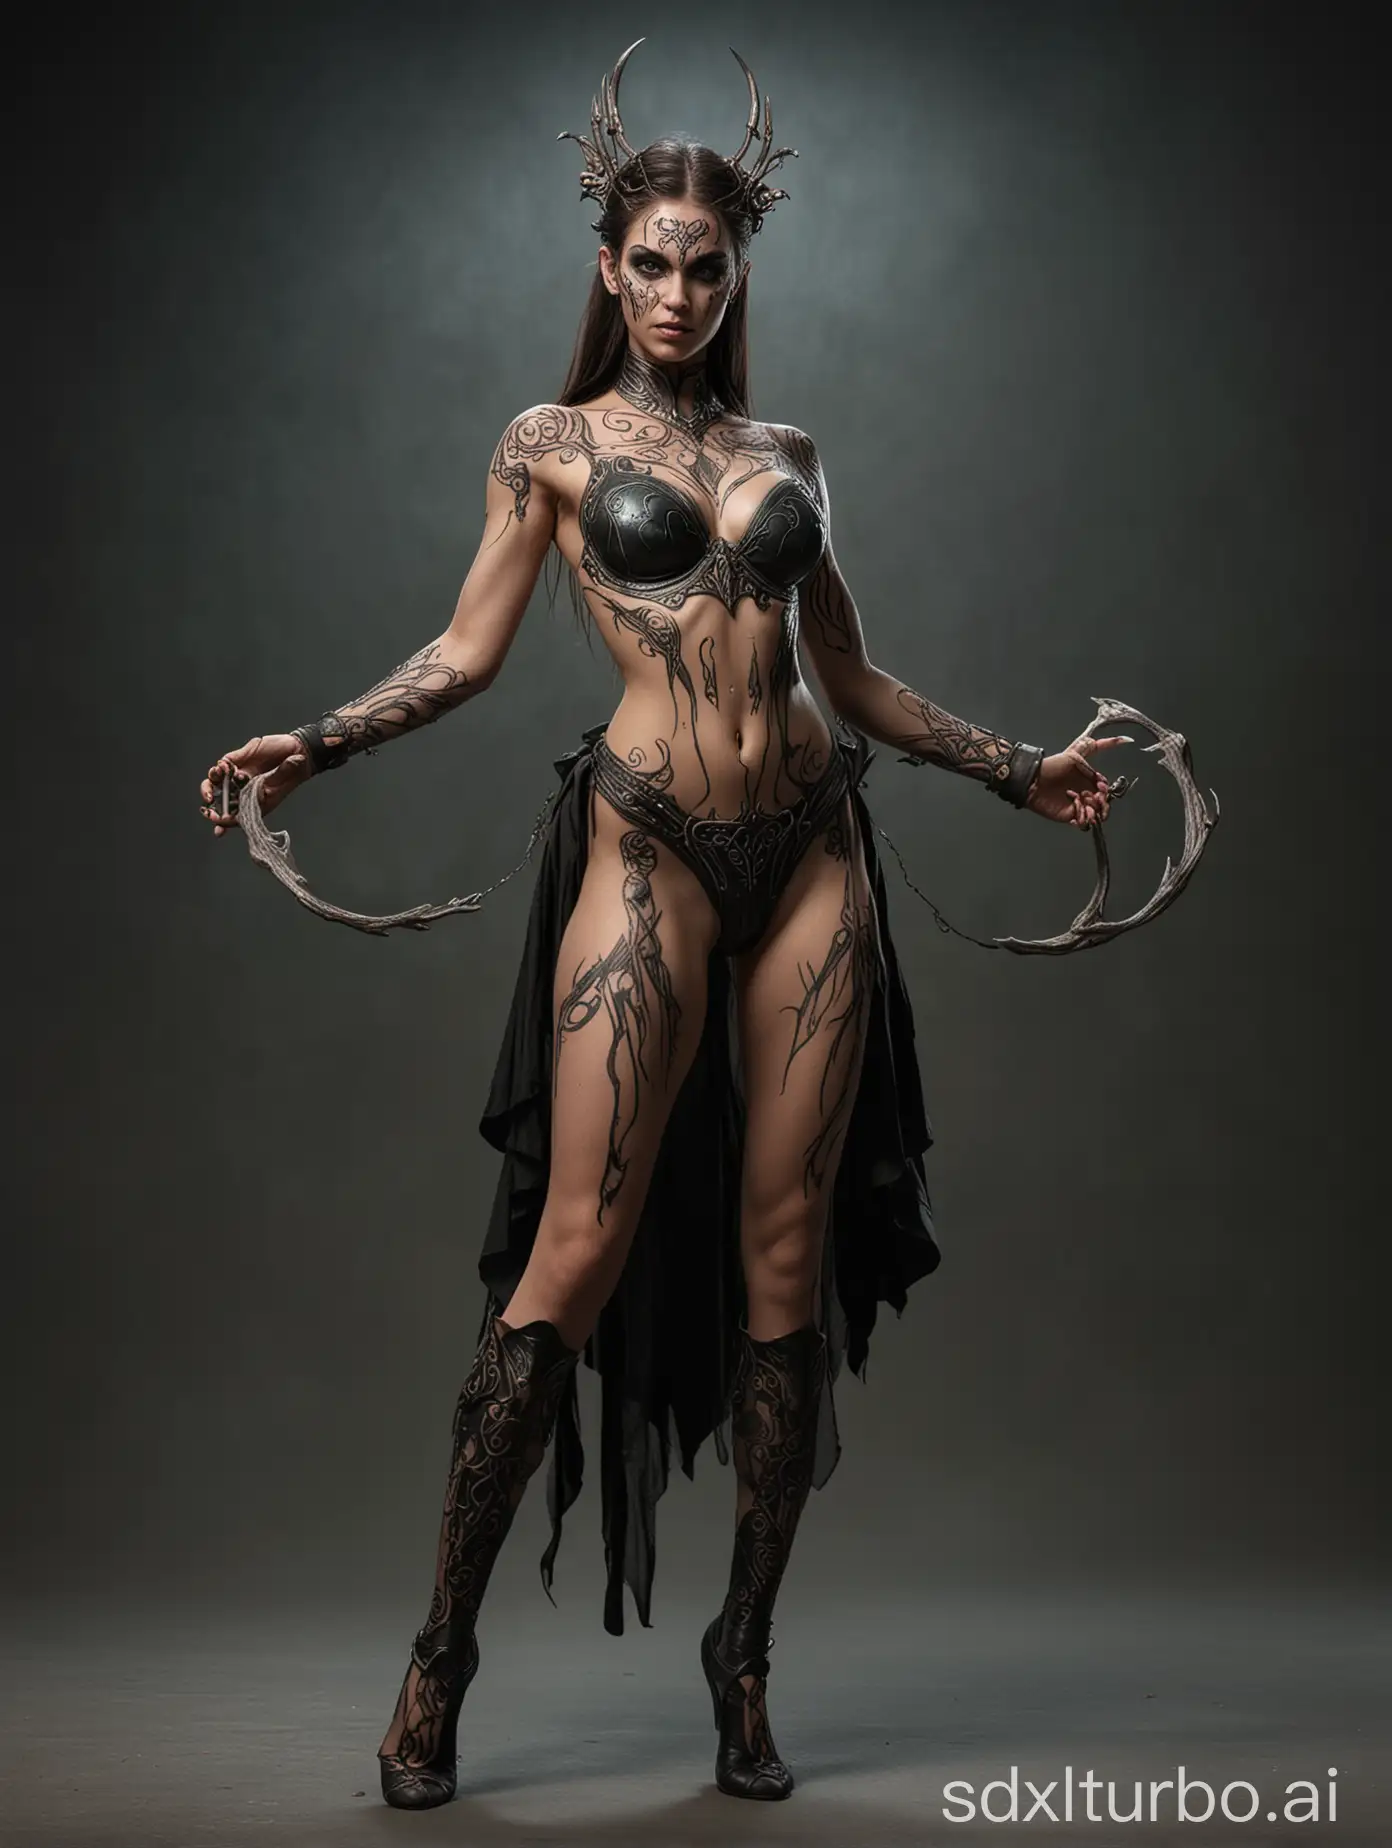 Enchantress-in-Dark-Fantasy-HalfNaked-Female-in-Action-Pose-with-Body-Art